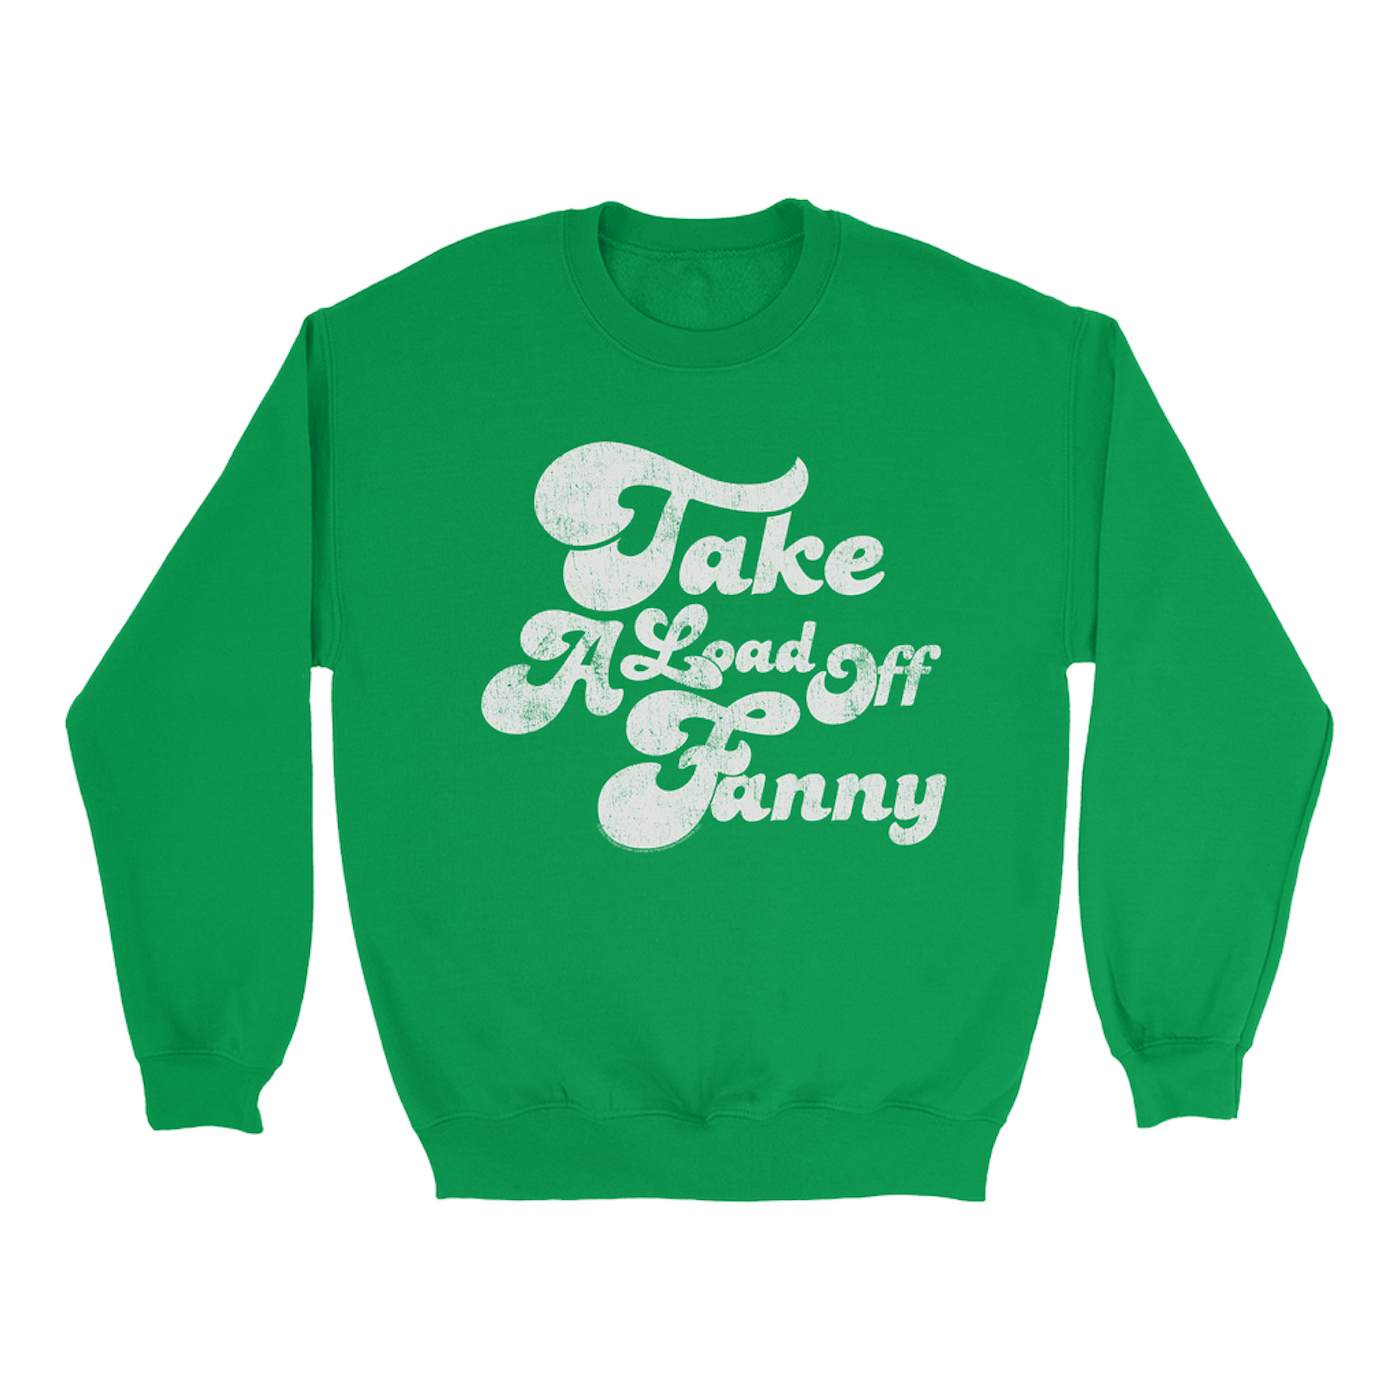 The Band Bright Colored Sweatshirt | Take A Load Off Fanny Distressed The Band Sweatshirt